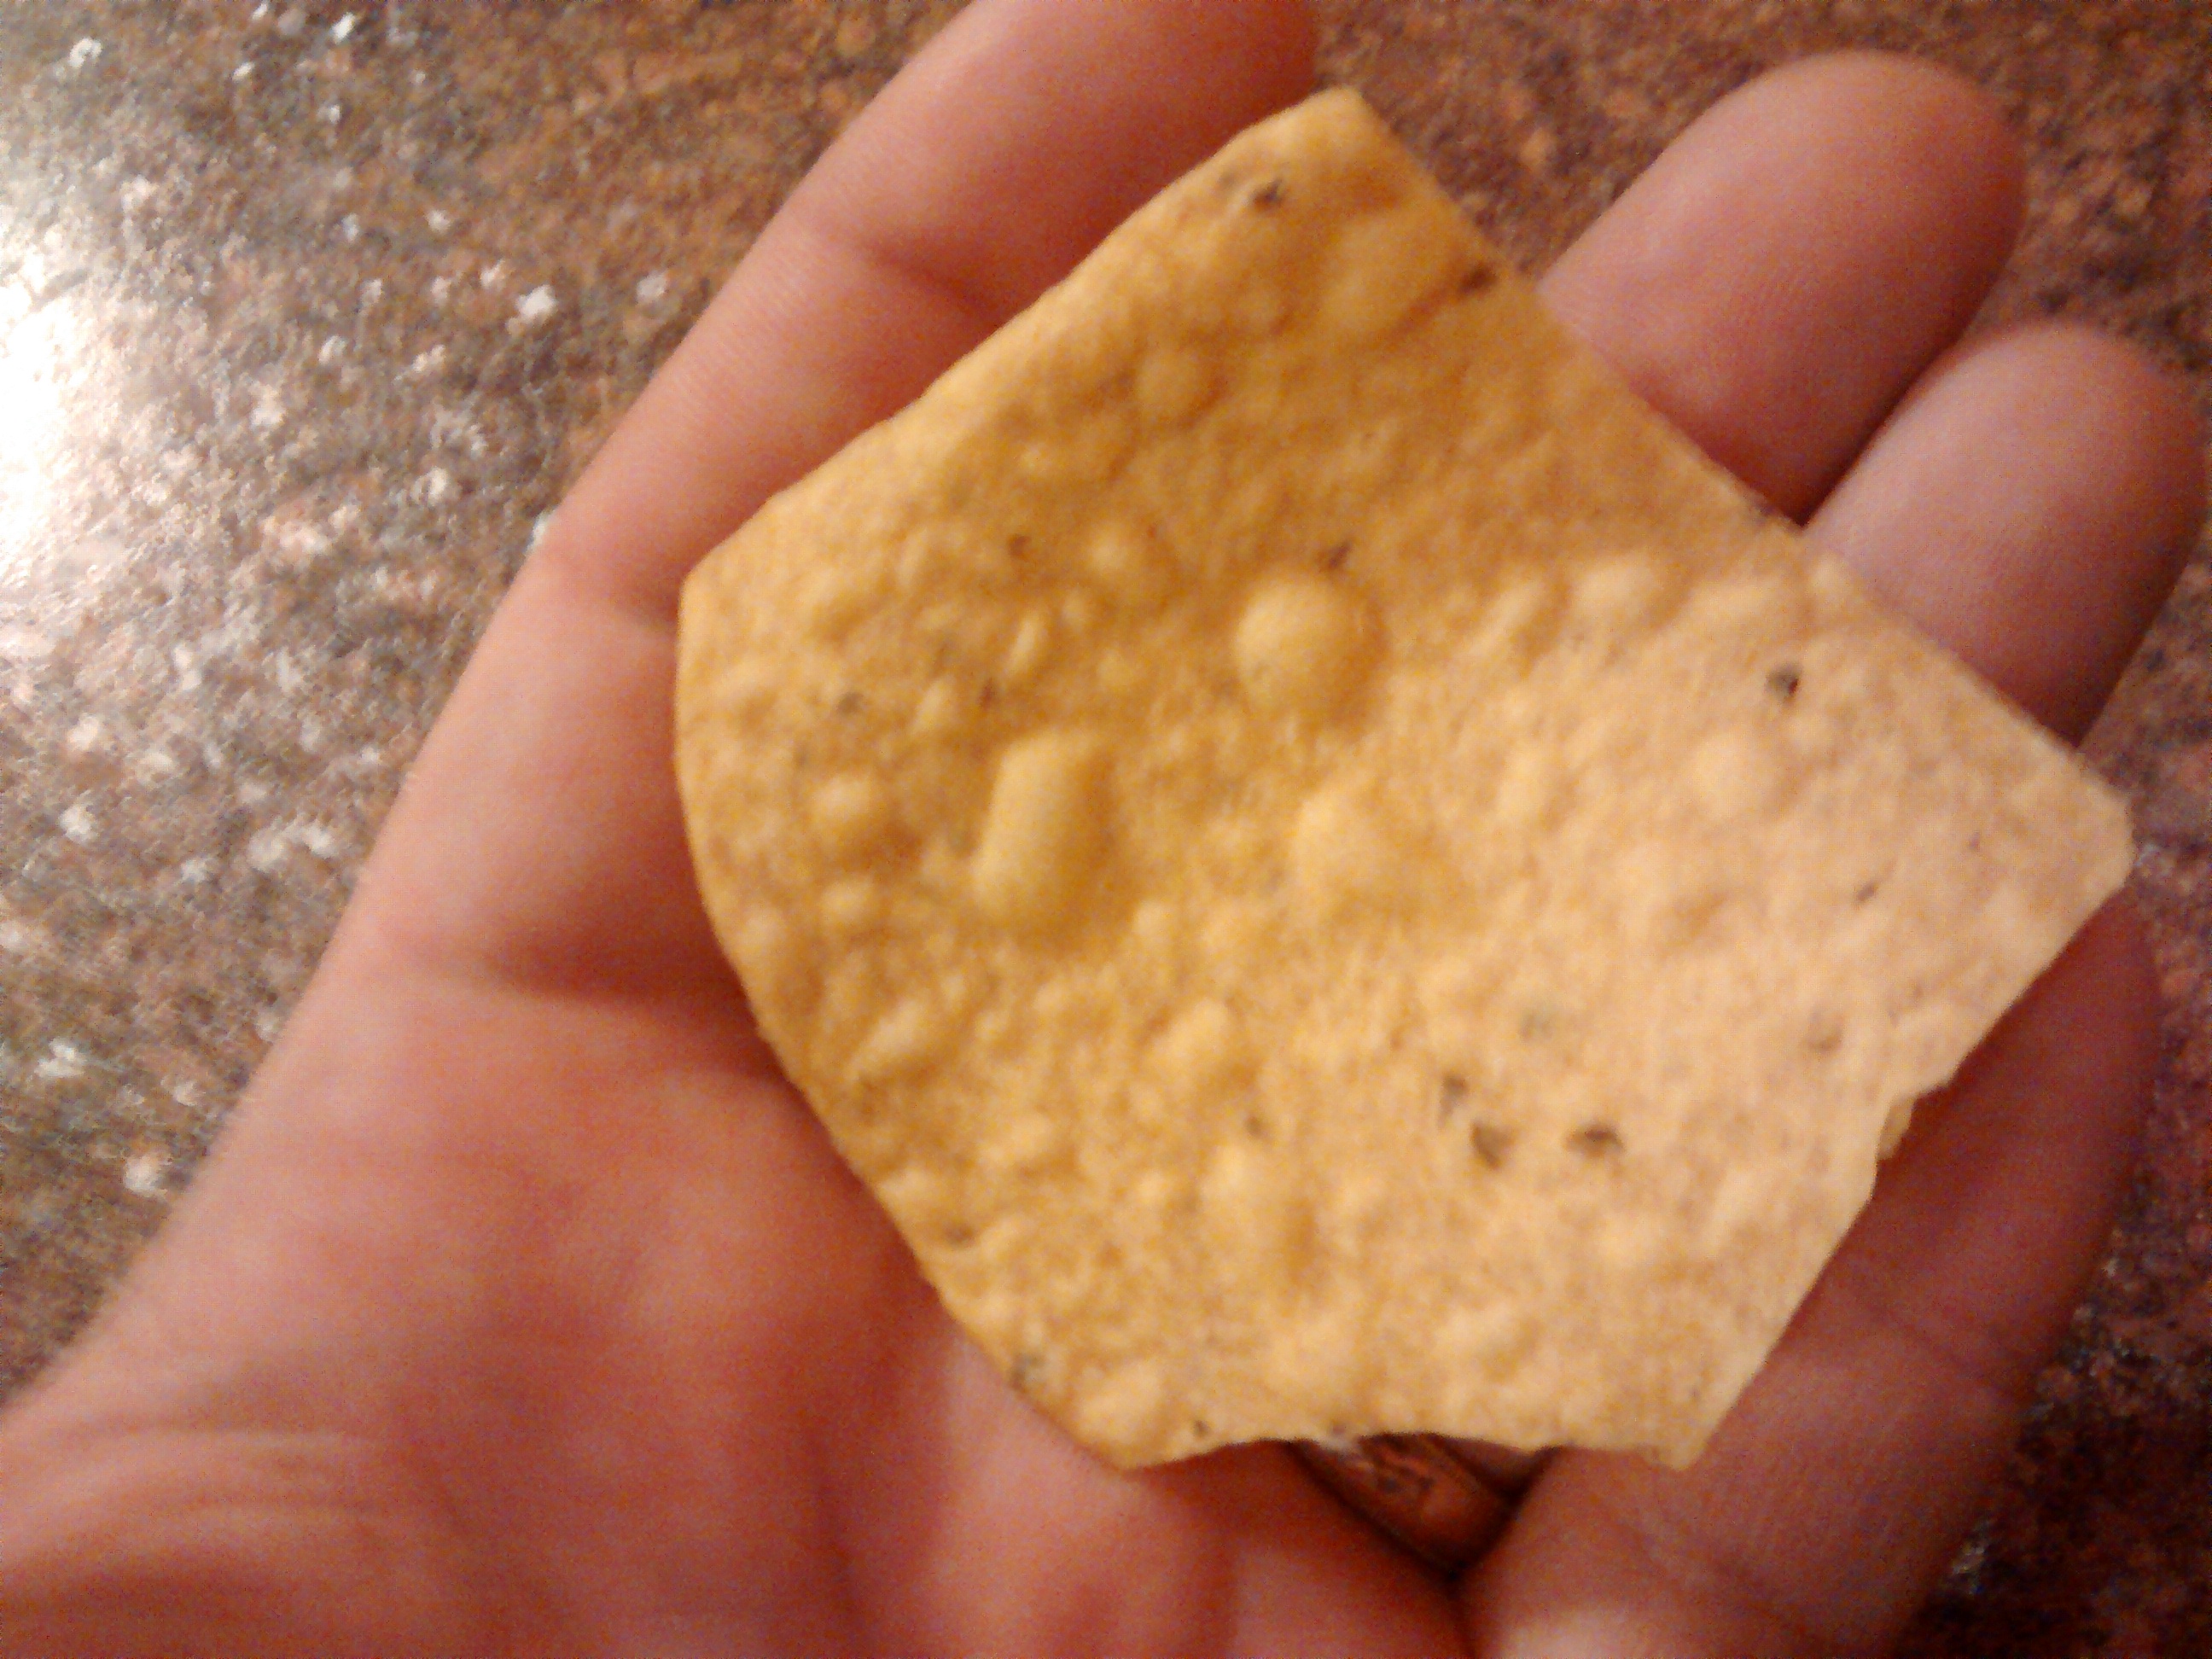 Most tortilla chips look like Talking Triangle, but this one looks like Penny the Pentagon!